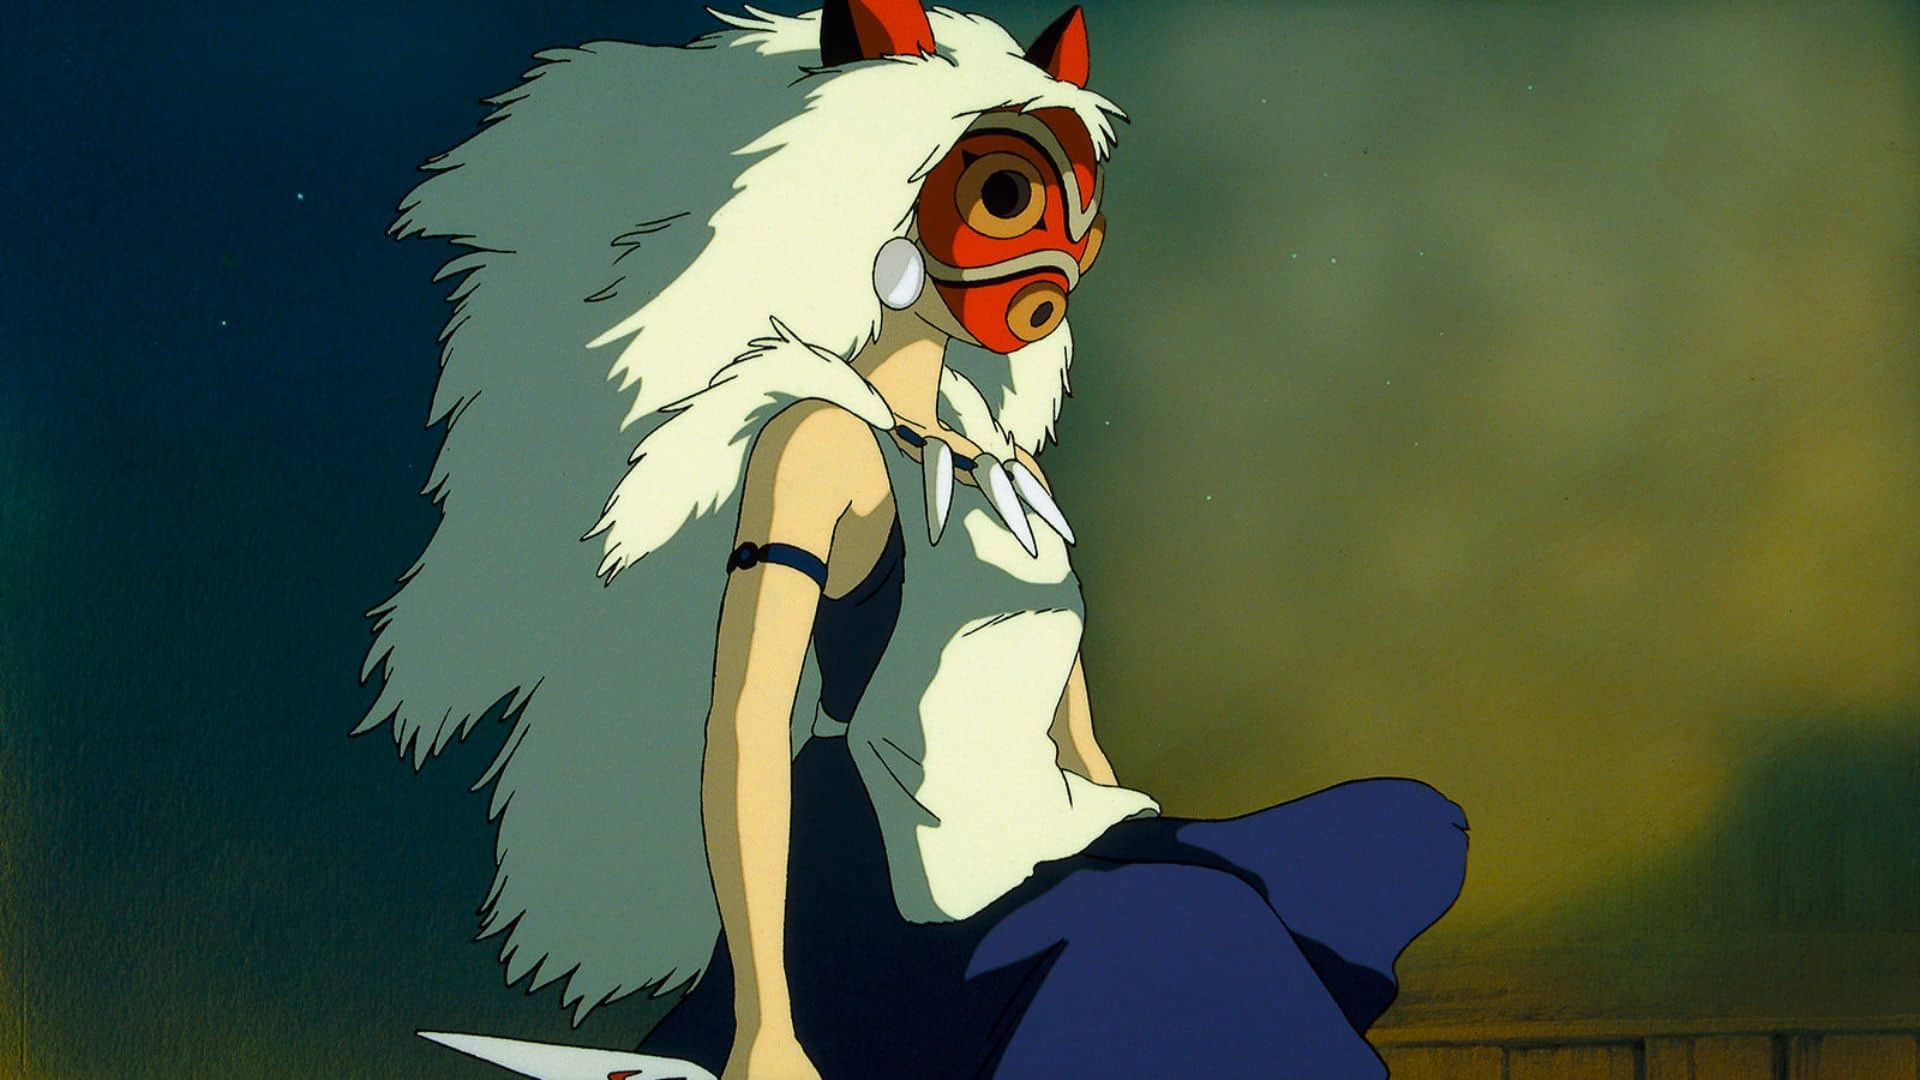 San sitting and wearing her mask in this image from HBO Max